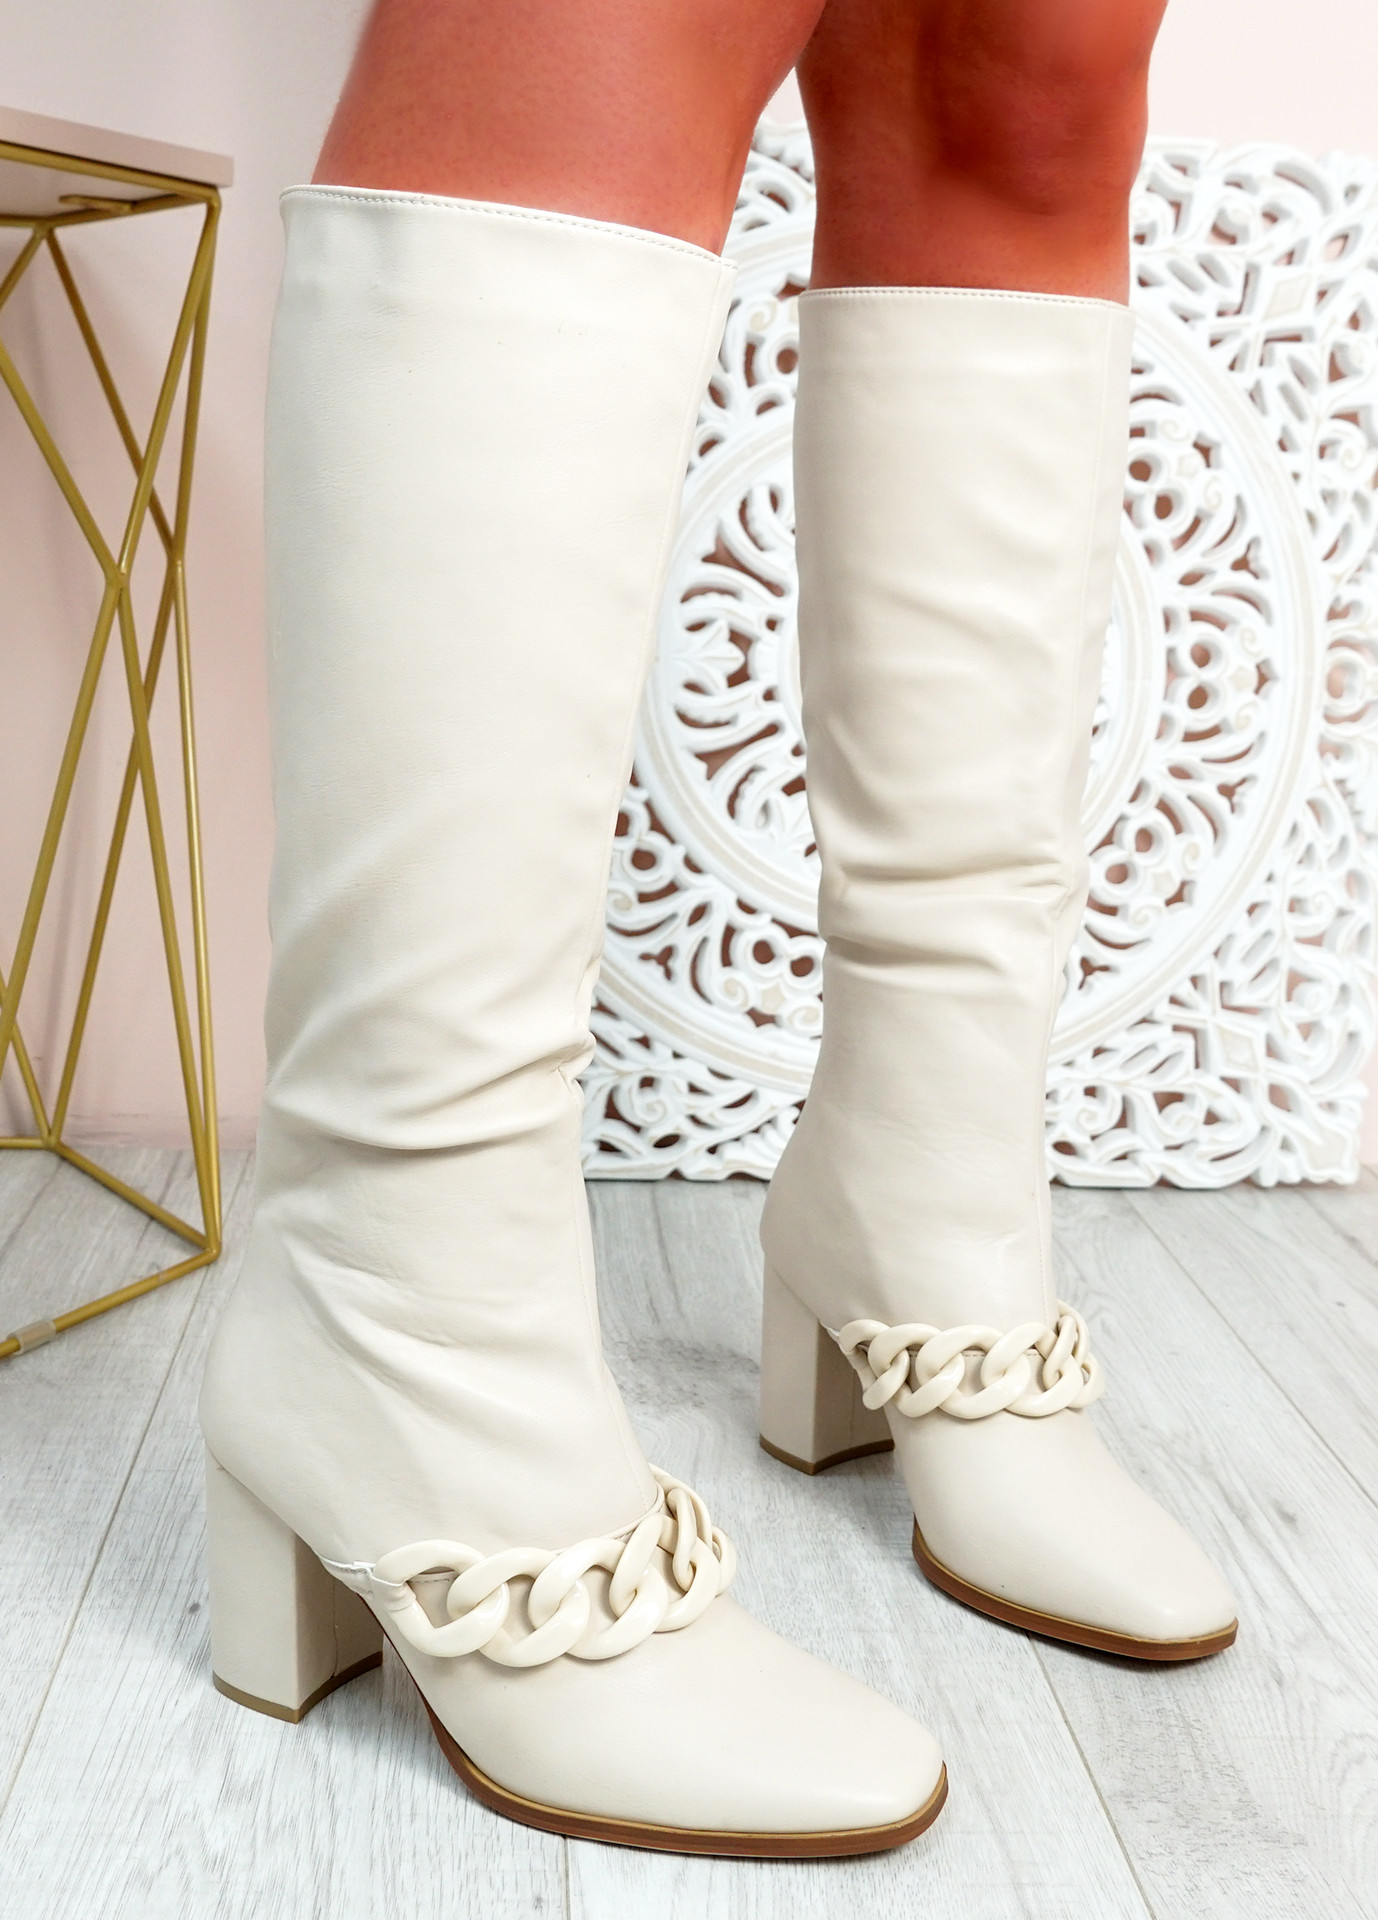 Dolores knee-high boots | Rodebjer.com